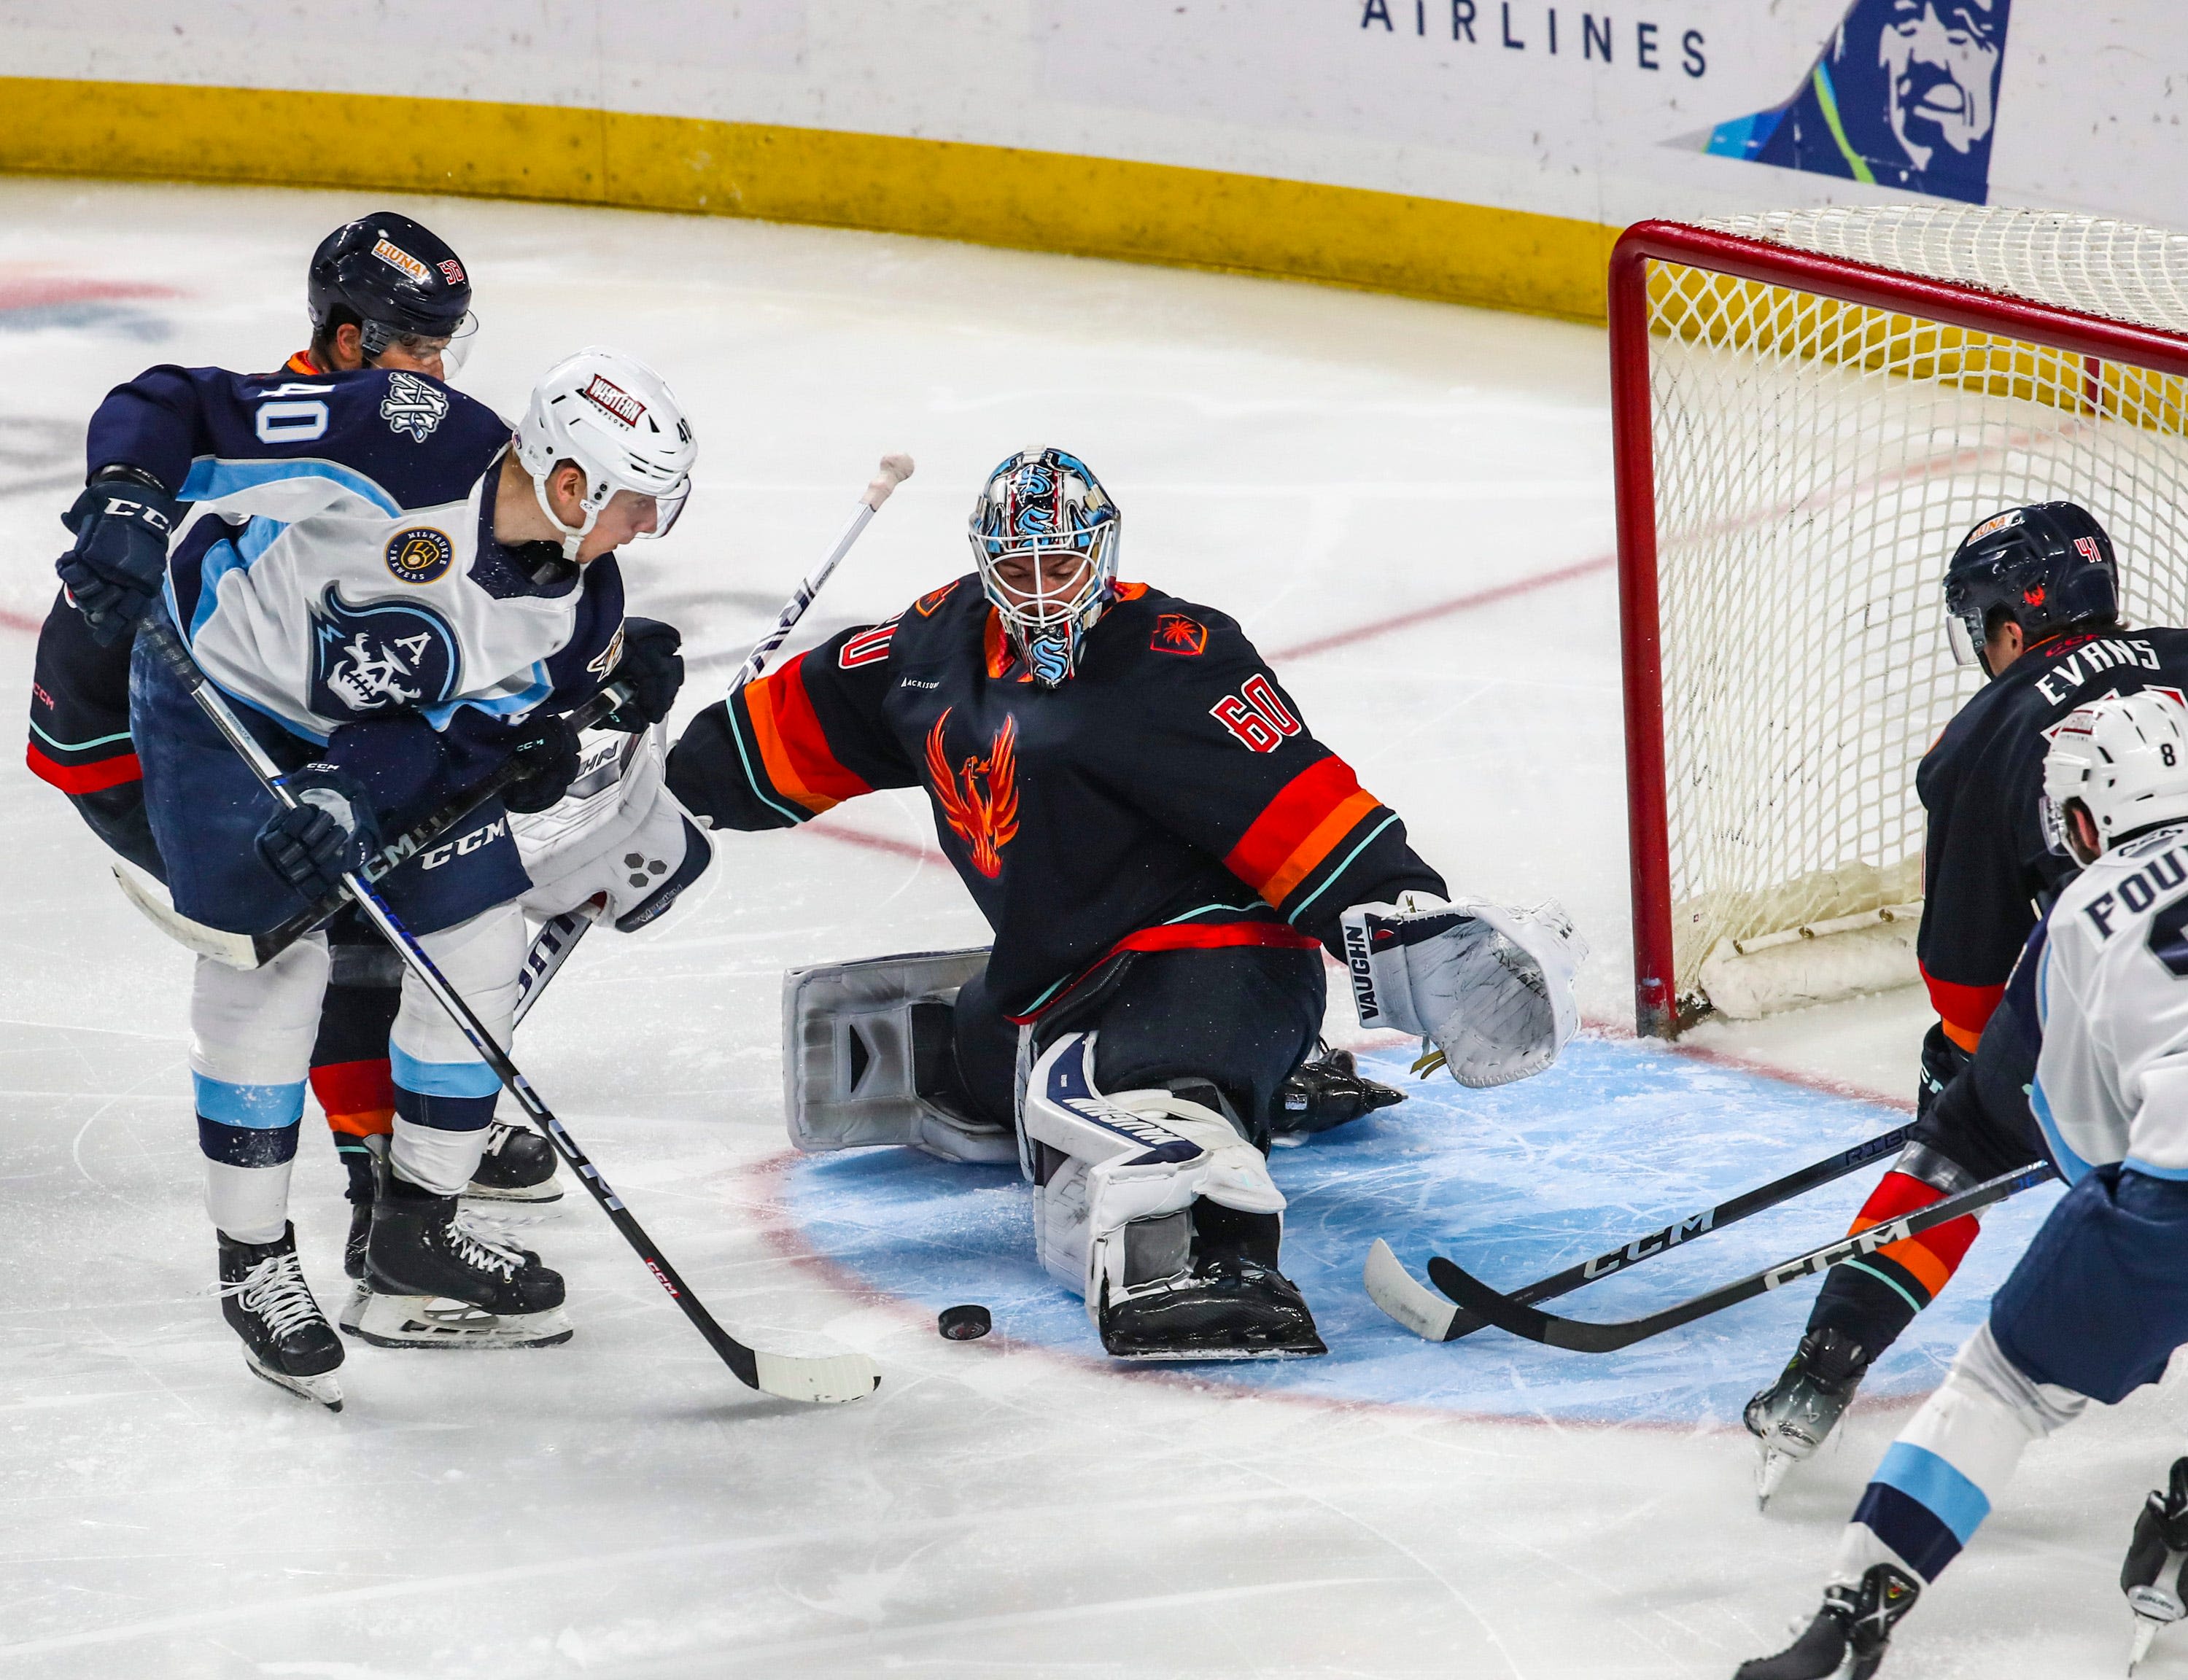 Admirals fall into 2-0 hole to Firebirds in their AHL Western Conference finals series